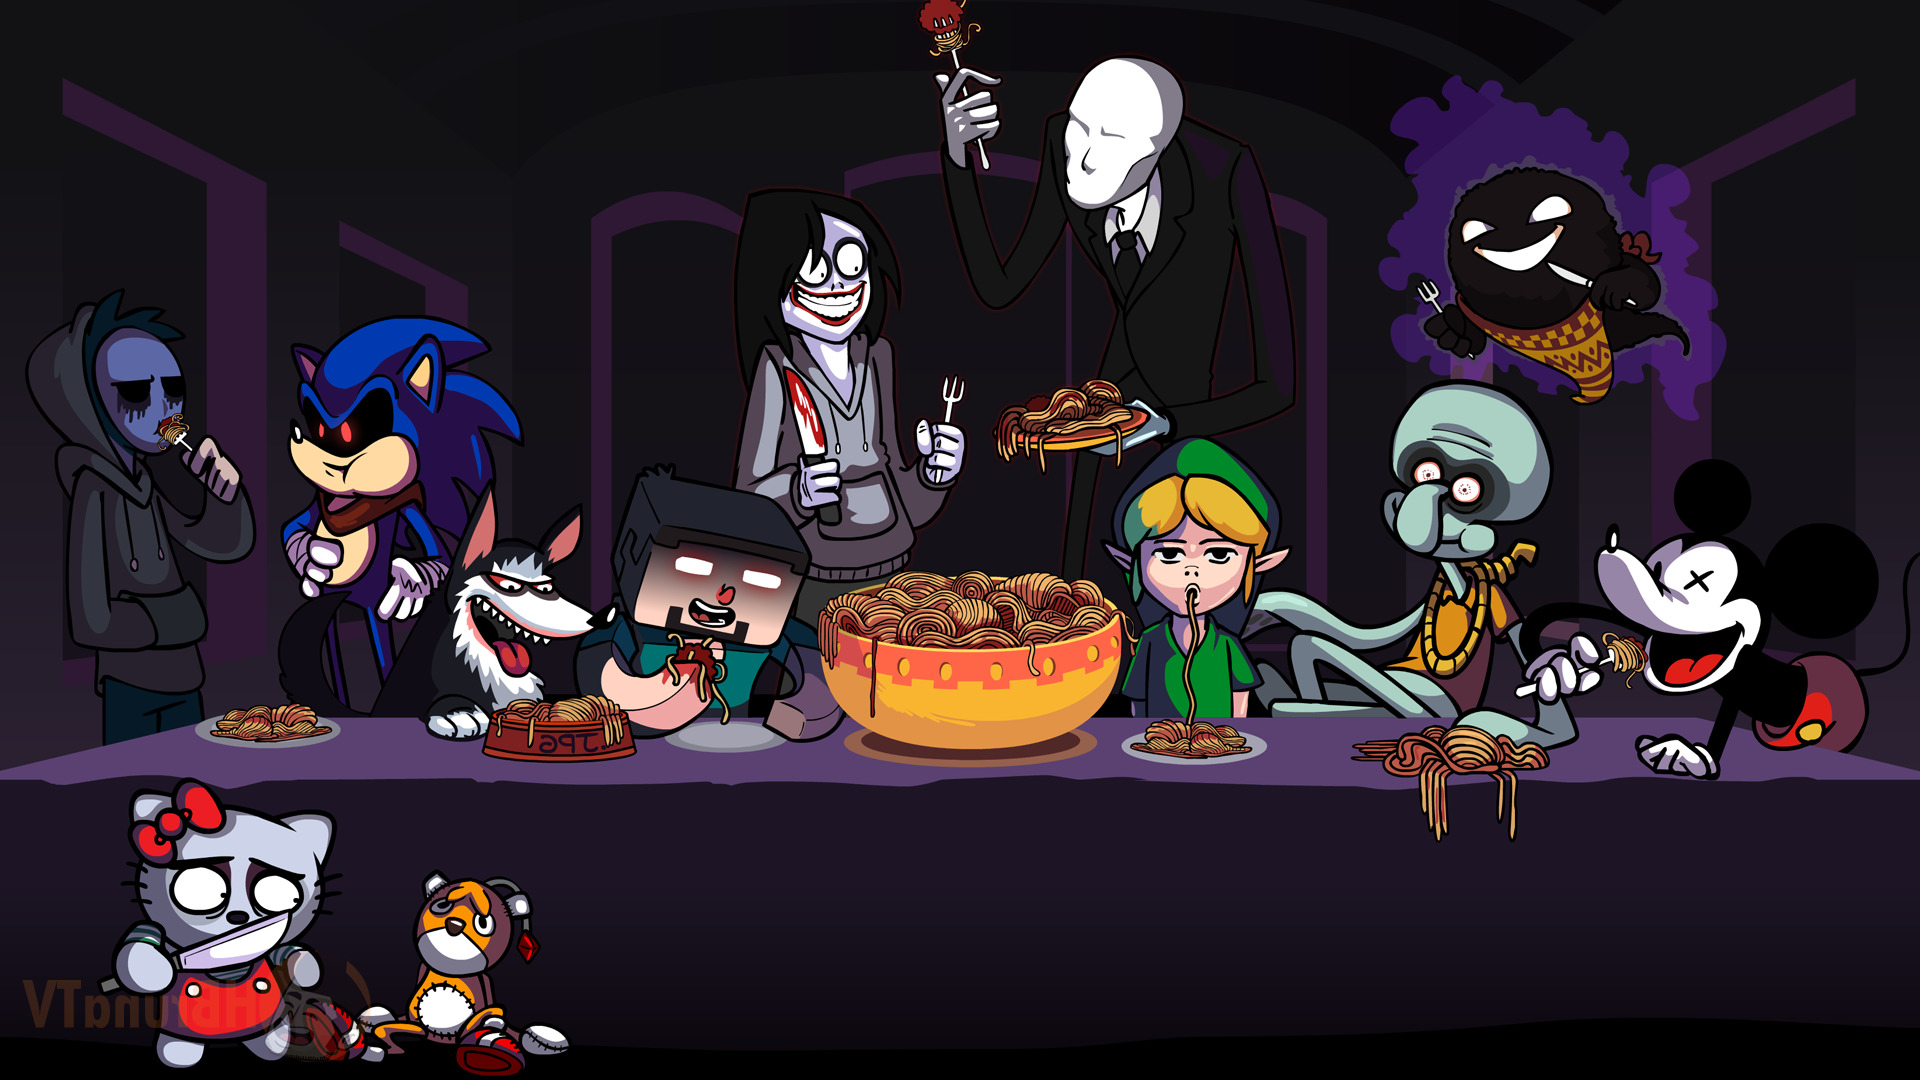 video Game Characters, Mickey Mouse, Ghast, Link, Sonic The Hedgehog, Spaghetti, Minecraft, Parody, Halloween, Slender Man, Hello Kitty, The Last Supper, Steve, Pokemon Wallpaper